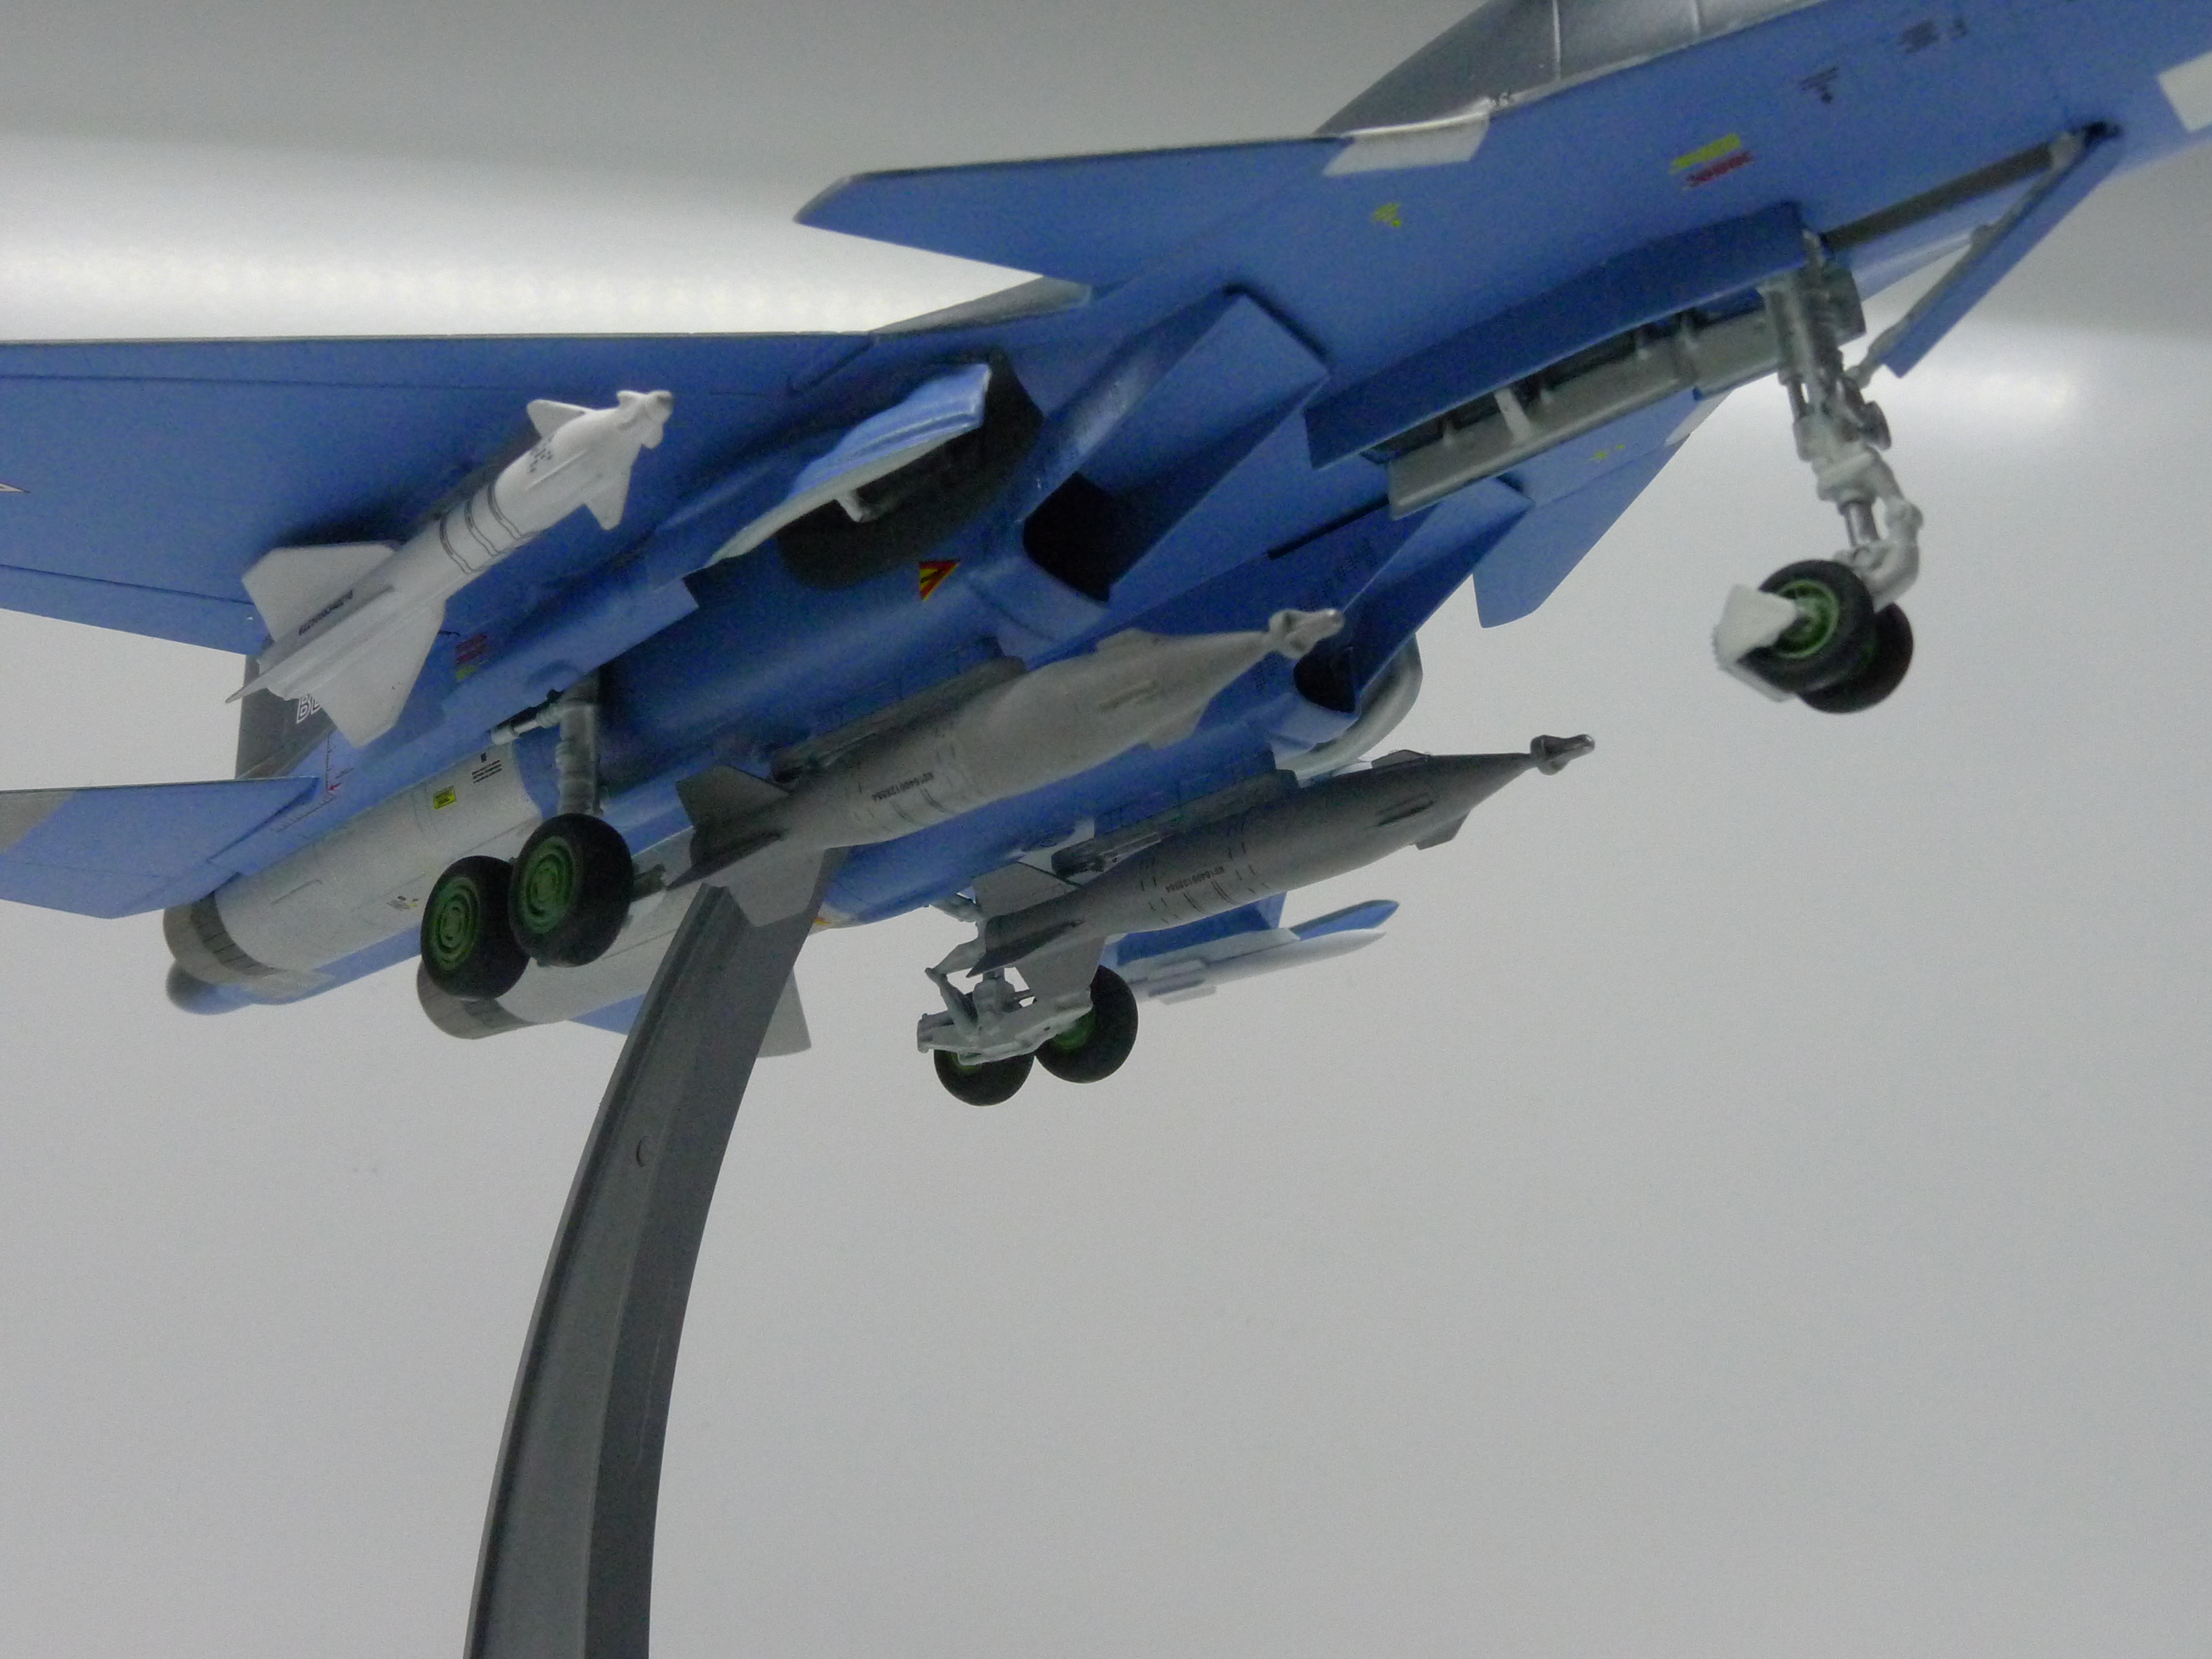        -34  1:72,   28 . ,  .  Model Russian front-line aircraft, the Su-34. Scale 1:72, hand made. # 4 hobbyplus.ru